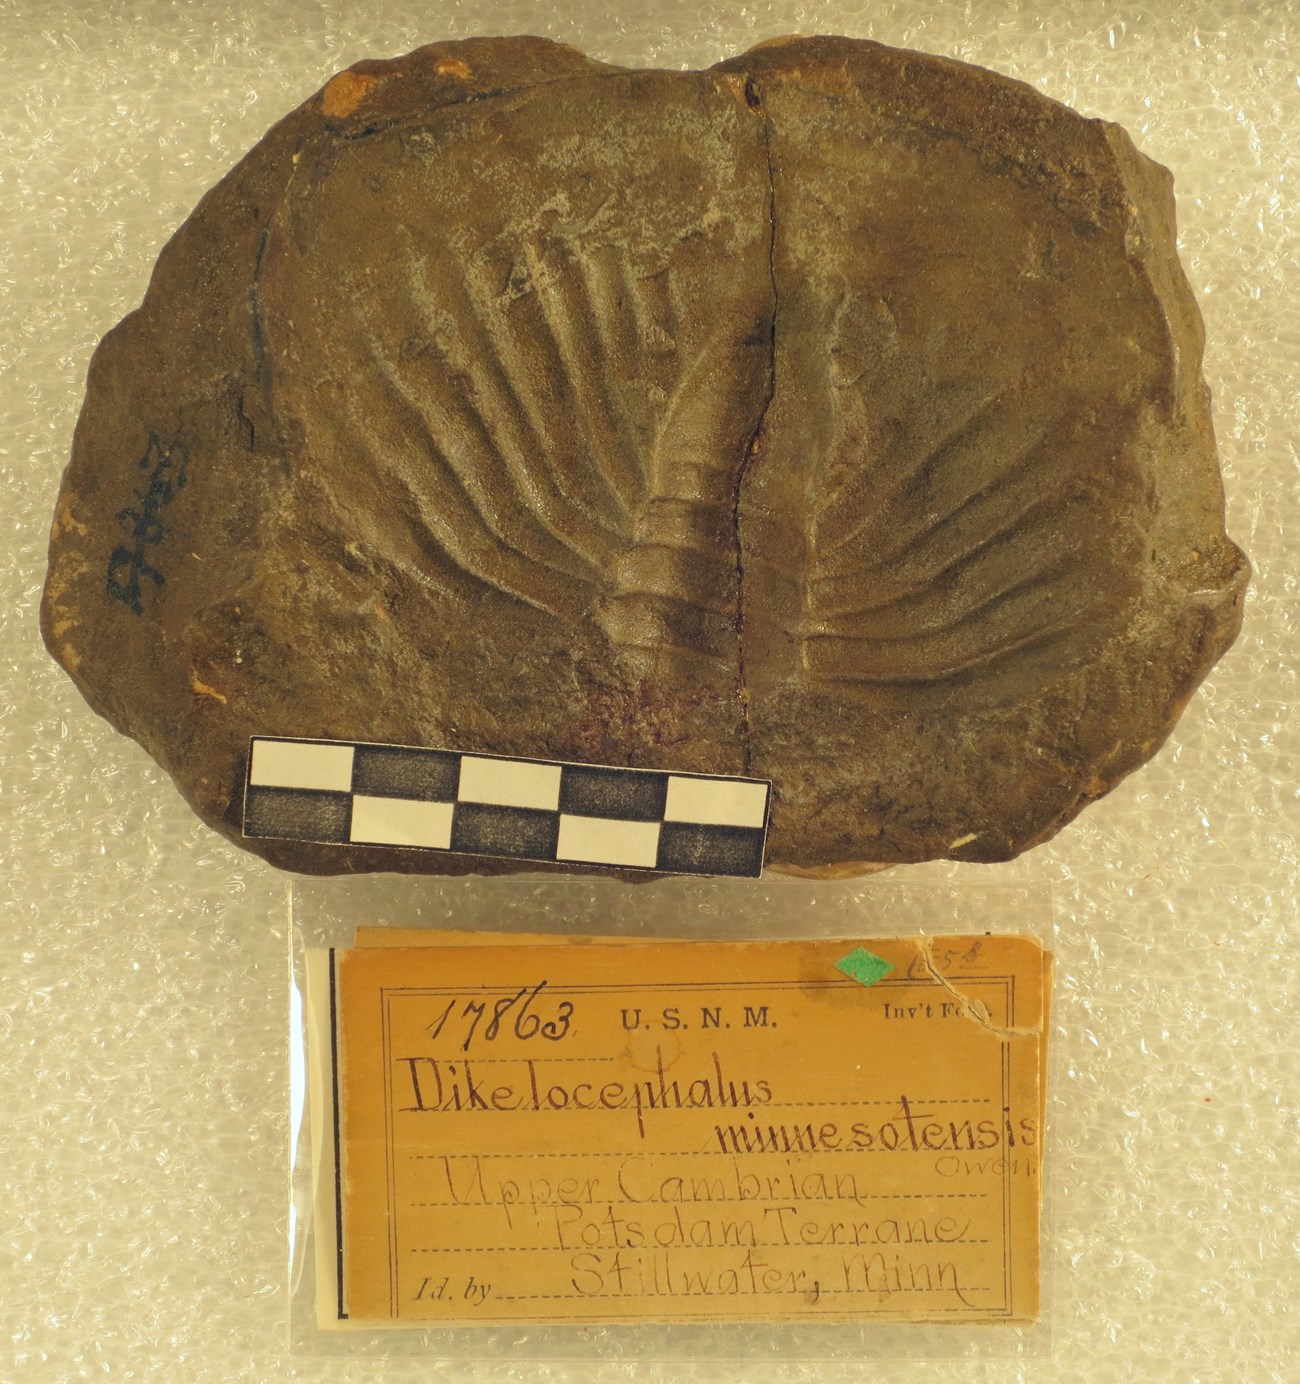 fossil trilobite with curation record card and scale bar